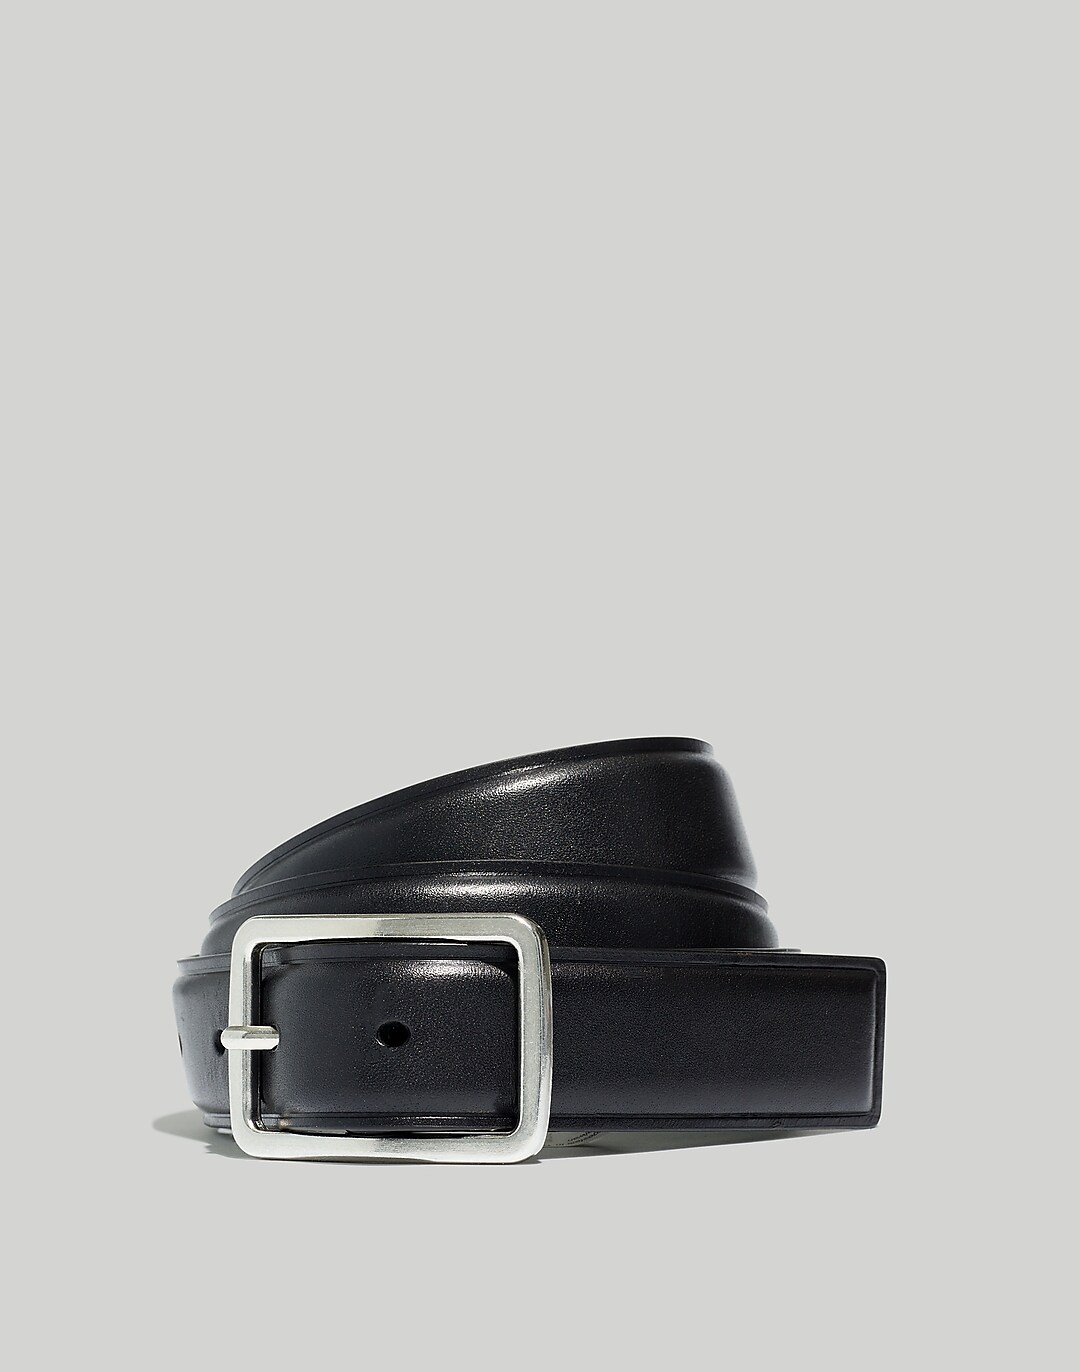 The Art of Matching Your Leather Belt With Shoes: 3 Tips and